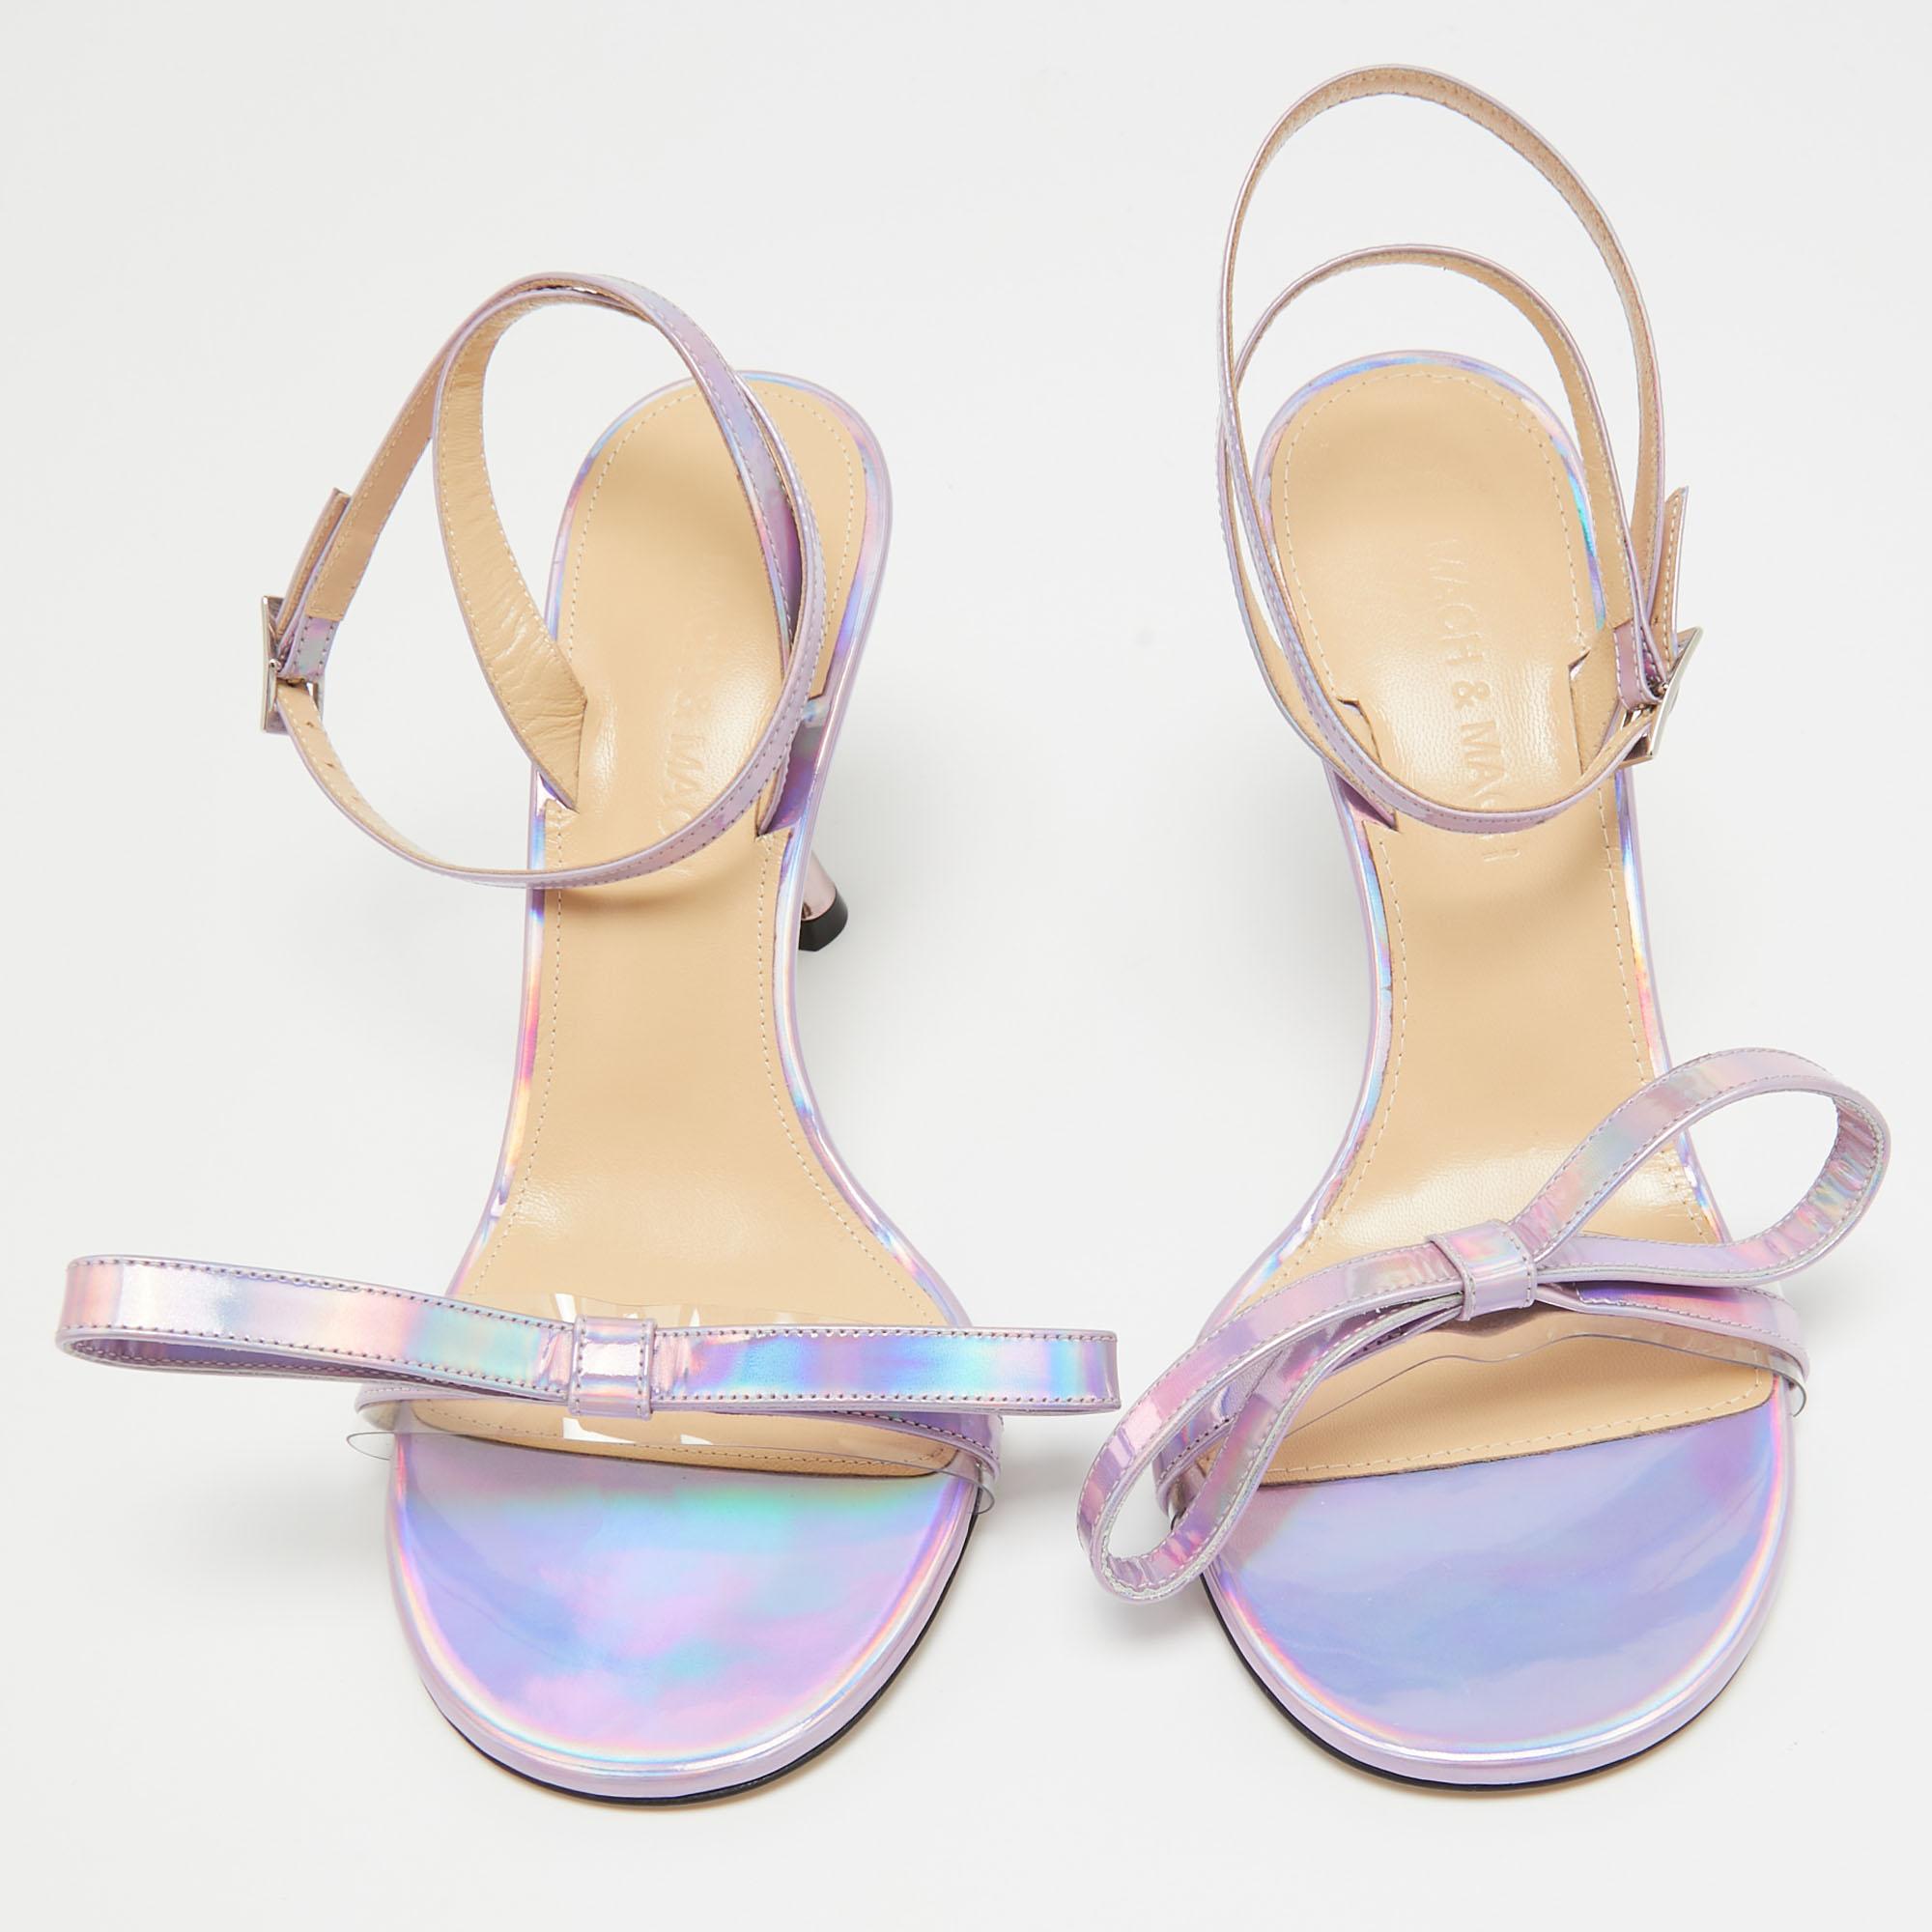 Discover footwear elegance with these Mach & Mach iridescent purple sandals. Meticulously designed, these heels marry fashion and comfort, ensuring you shine in every setting.

Includes: Original Dustbag, Original Box, Extra Heel Tips, Info Card

